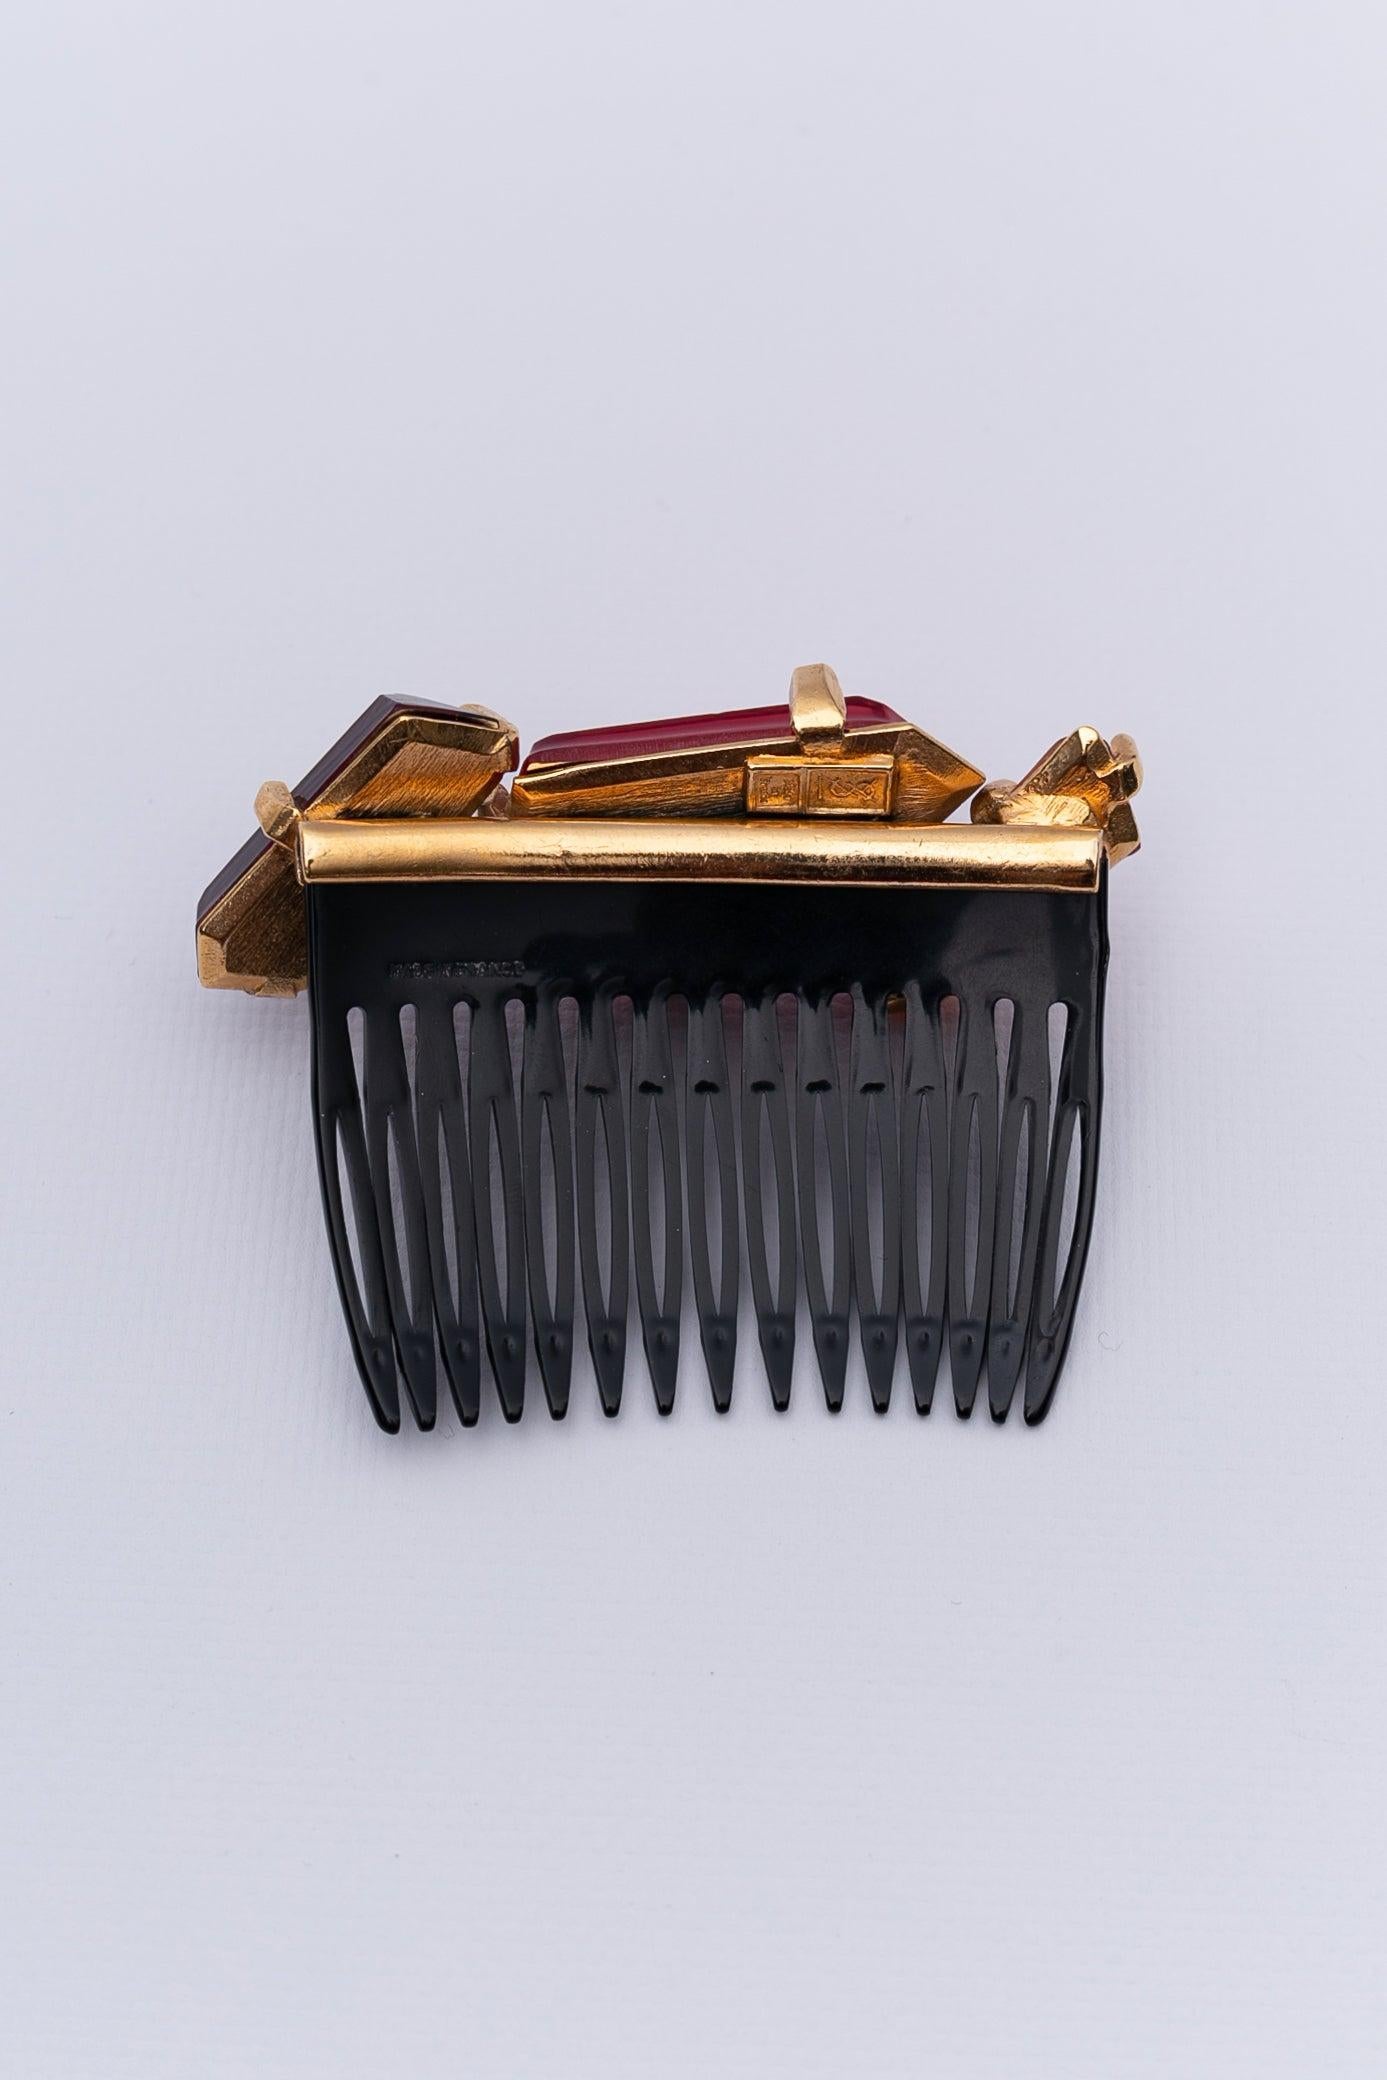 Yves Saint Laurent (Made in France) Comb topped with three cabochons in pink, mauve and orange resin.

Additional information: 
Dimensions: Length: 7 cm (2.75